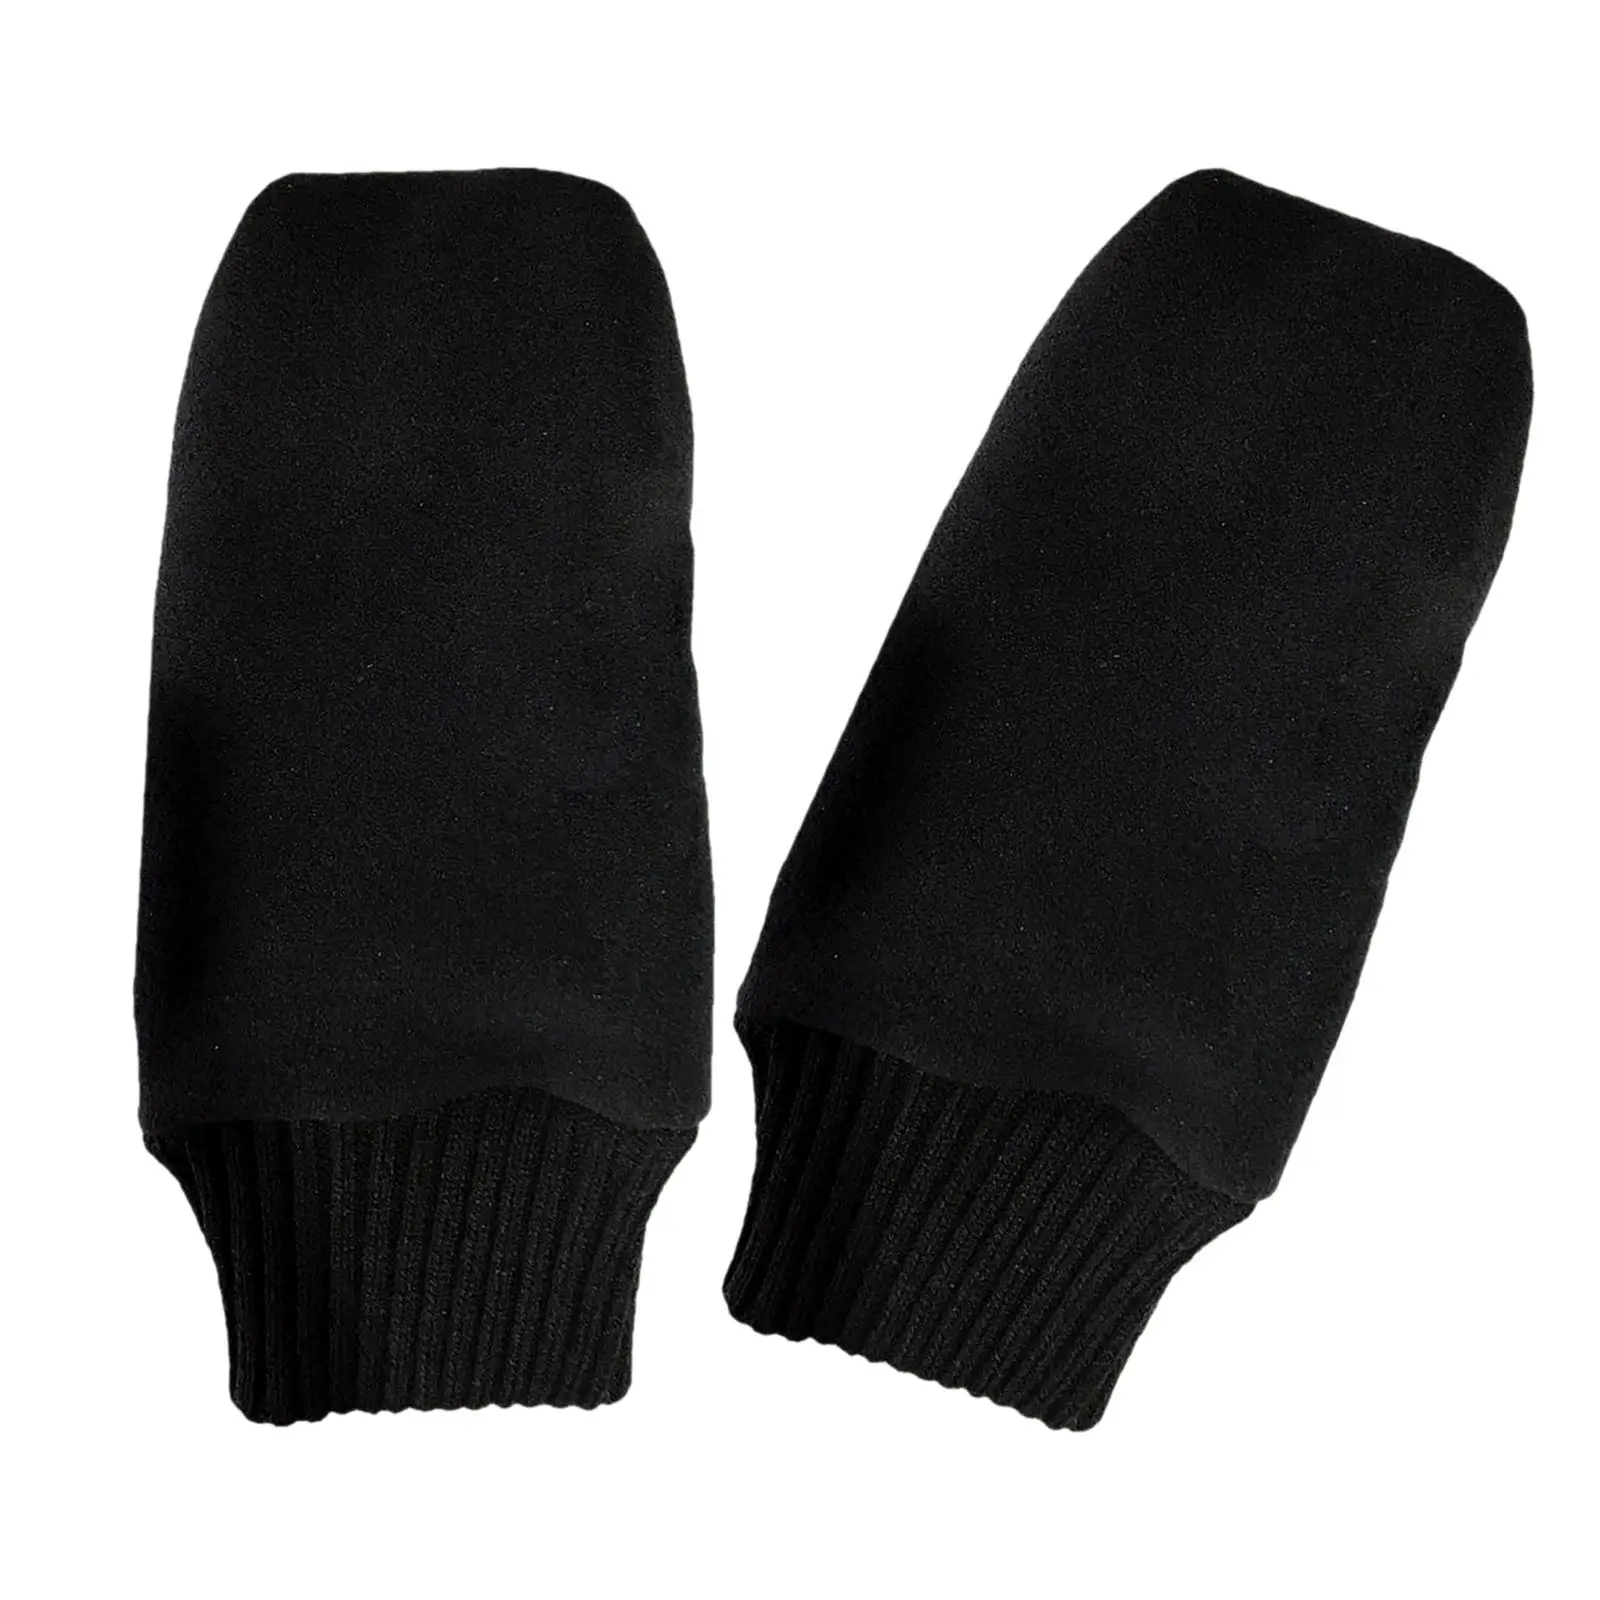 Dual Layer Golf Gloves Golf Equipment Soft Non Slip Easy to Wear Mitts Mitten Breathable Adjustable for Training Exercise Golfer